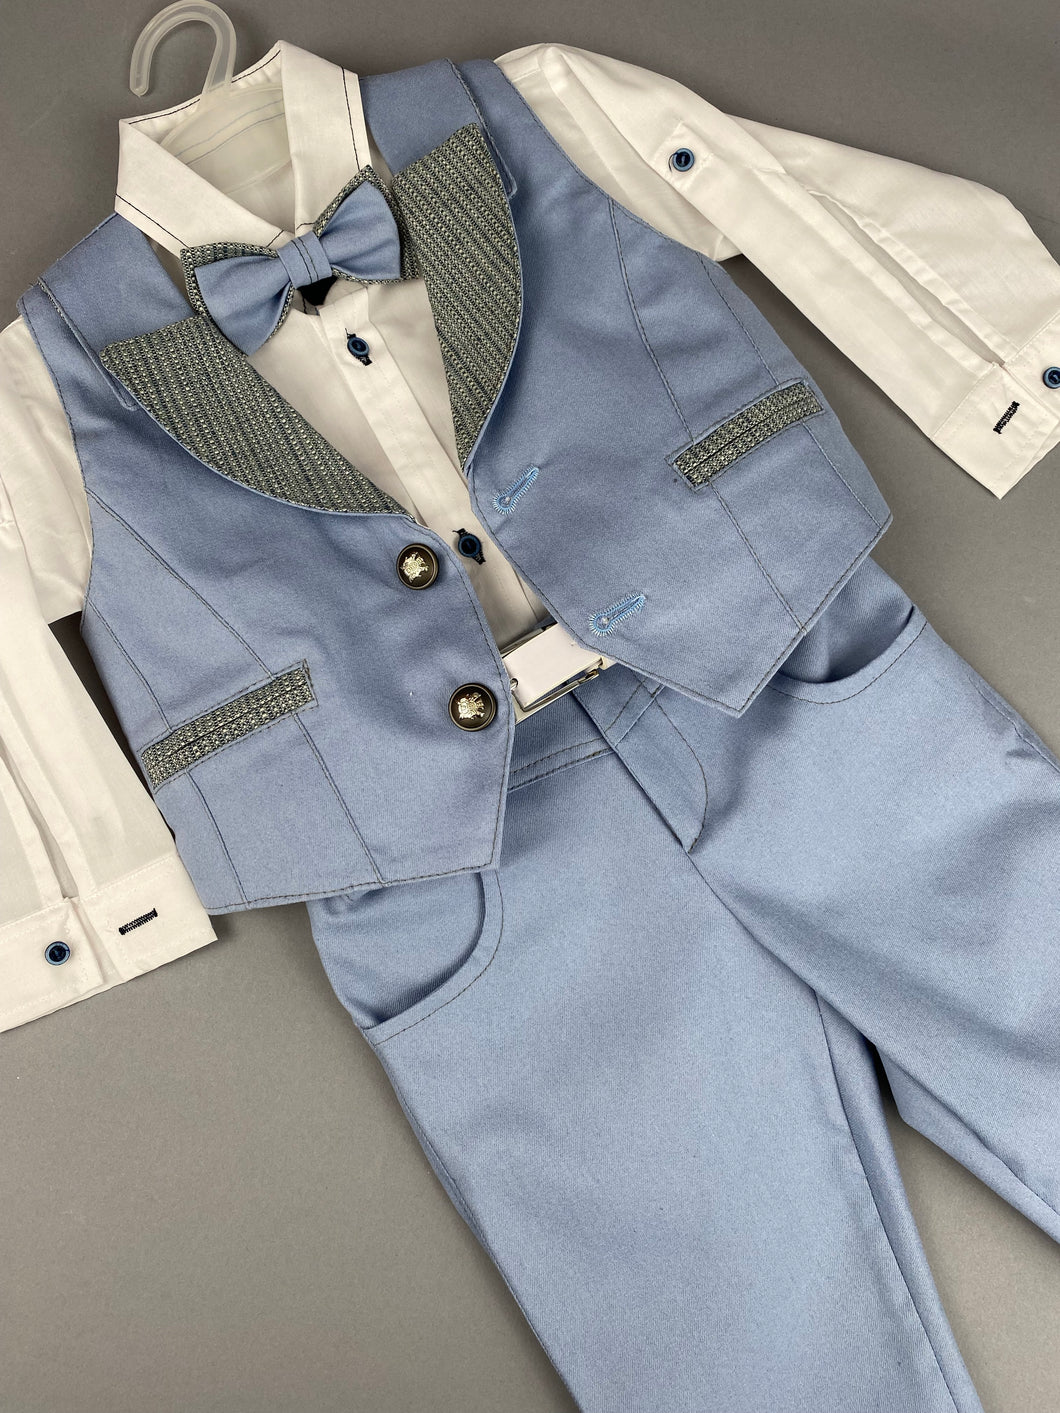 Rosies Collections 6pc Suit, Pants, Vest, Dress Shirt, Bow Tie, Belt and Hat, made in Greece,  exclusively for Rosies Collections. S202340